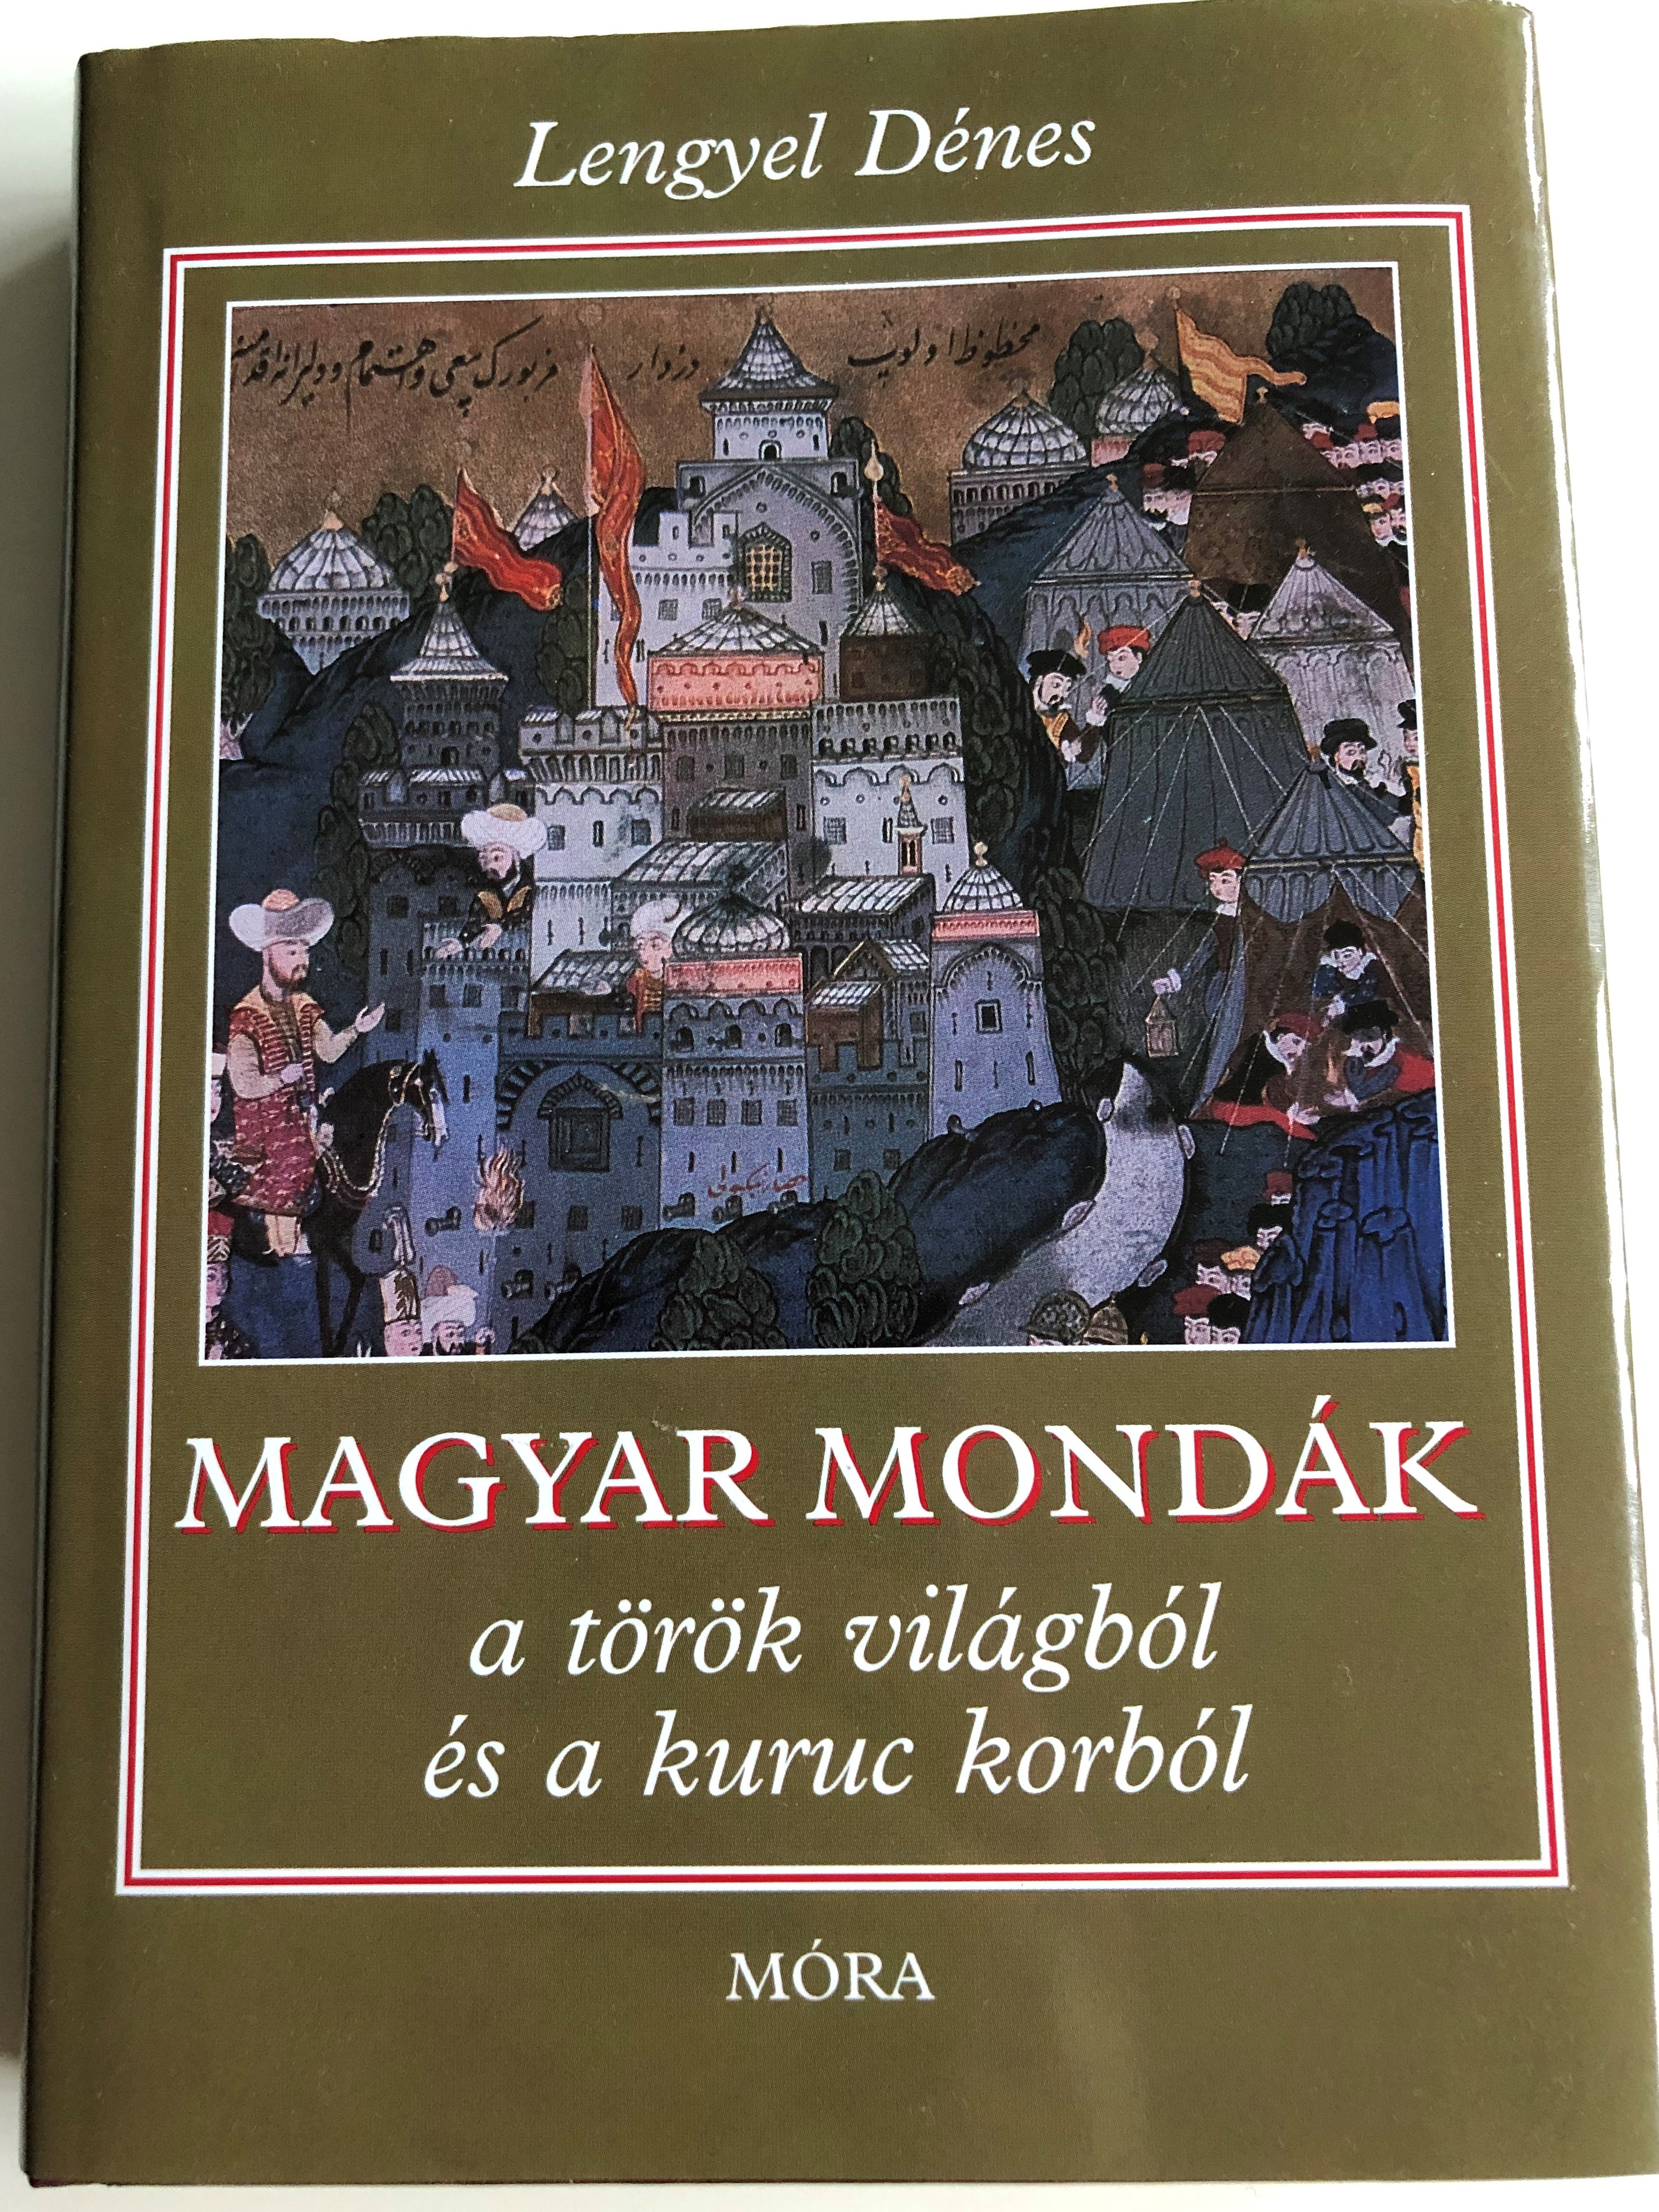 magyar-mond-k-a-t-r-k-vil-gb-l-s-a-kuruc-korb-l-by-lengyel-d-nes-hungarian-legends-and-sagas-from-the-medieval-turkish-rule-10th-edition-m-ra-2009-1-.jpg